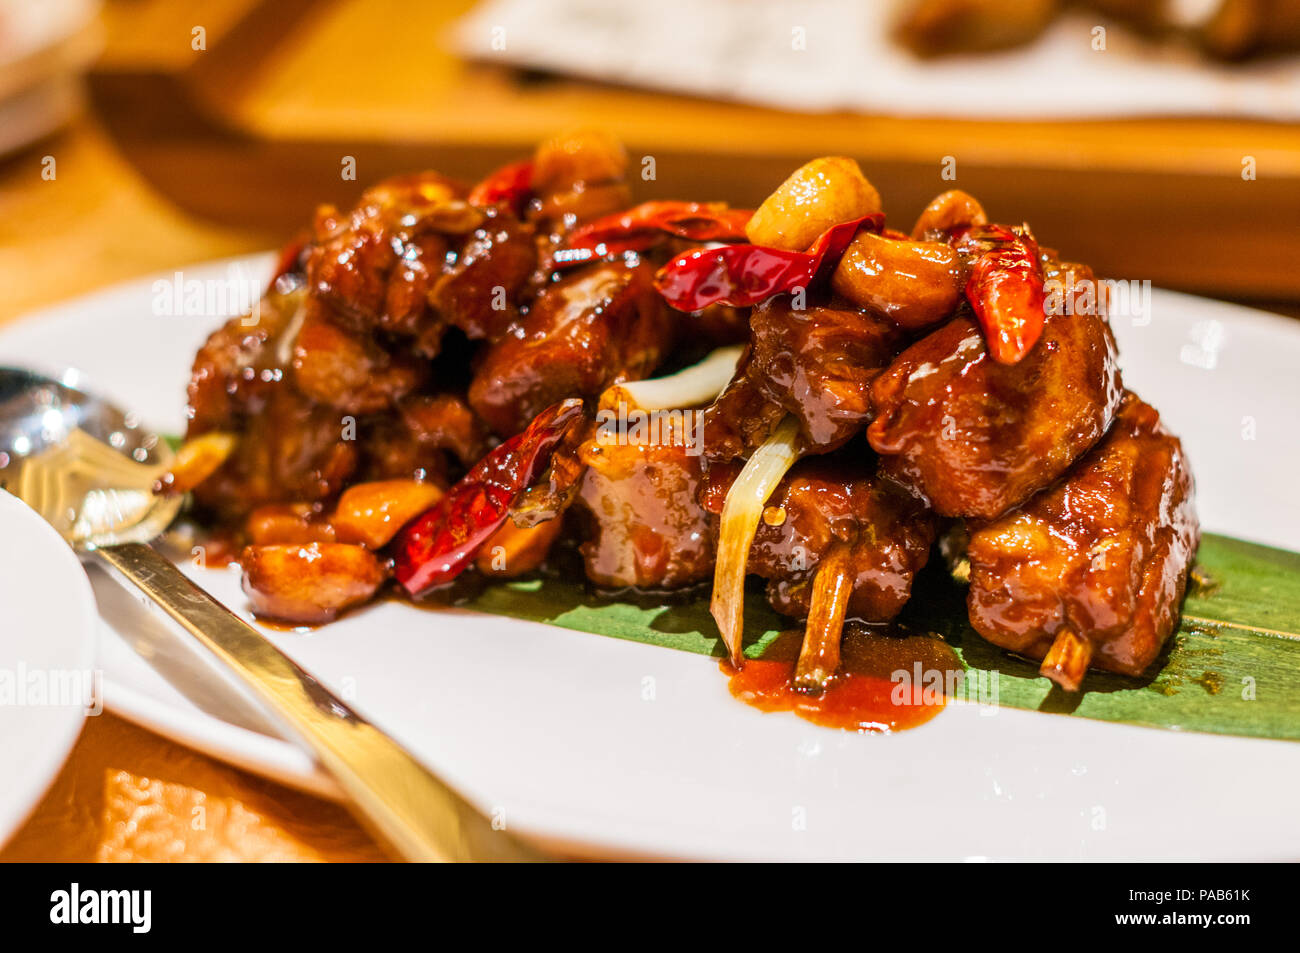 Wisdom Frees Perplexity a Kong cuisine dish created to pass secret messages where the bone of the pork ribs has been removed. Stock Photo